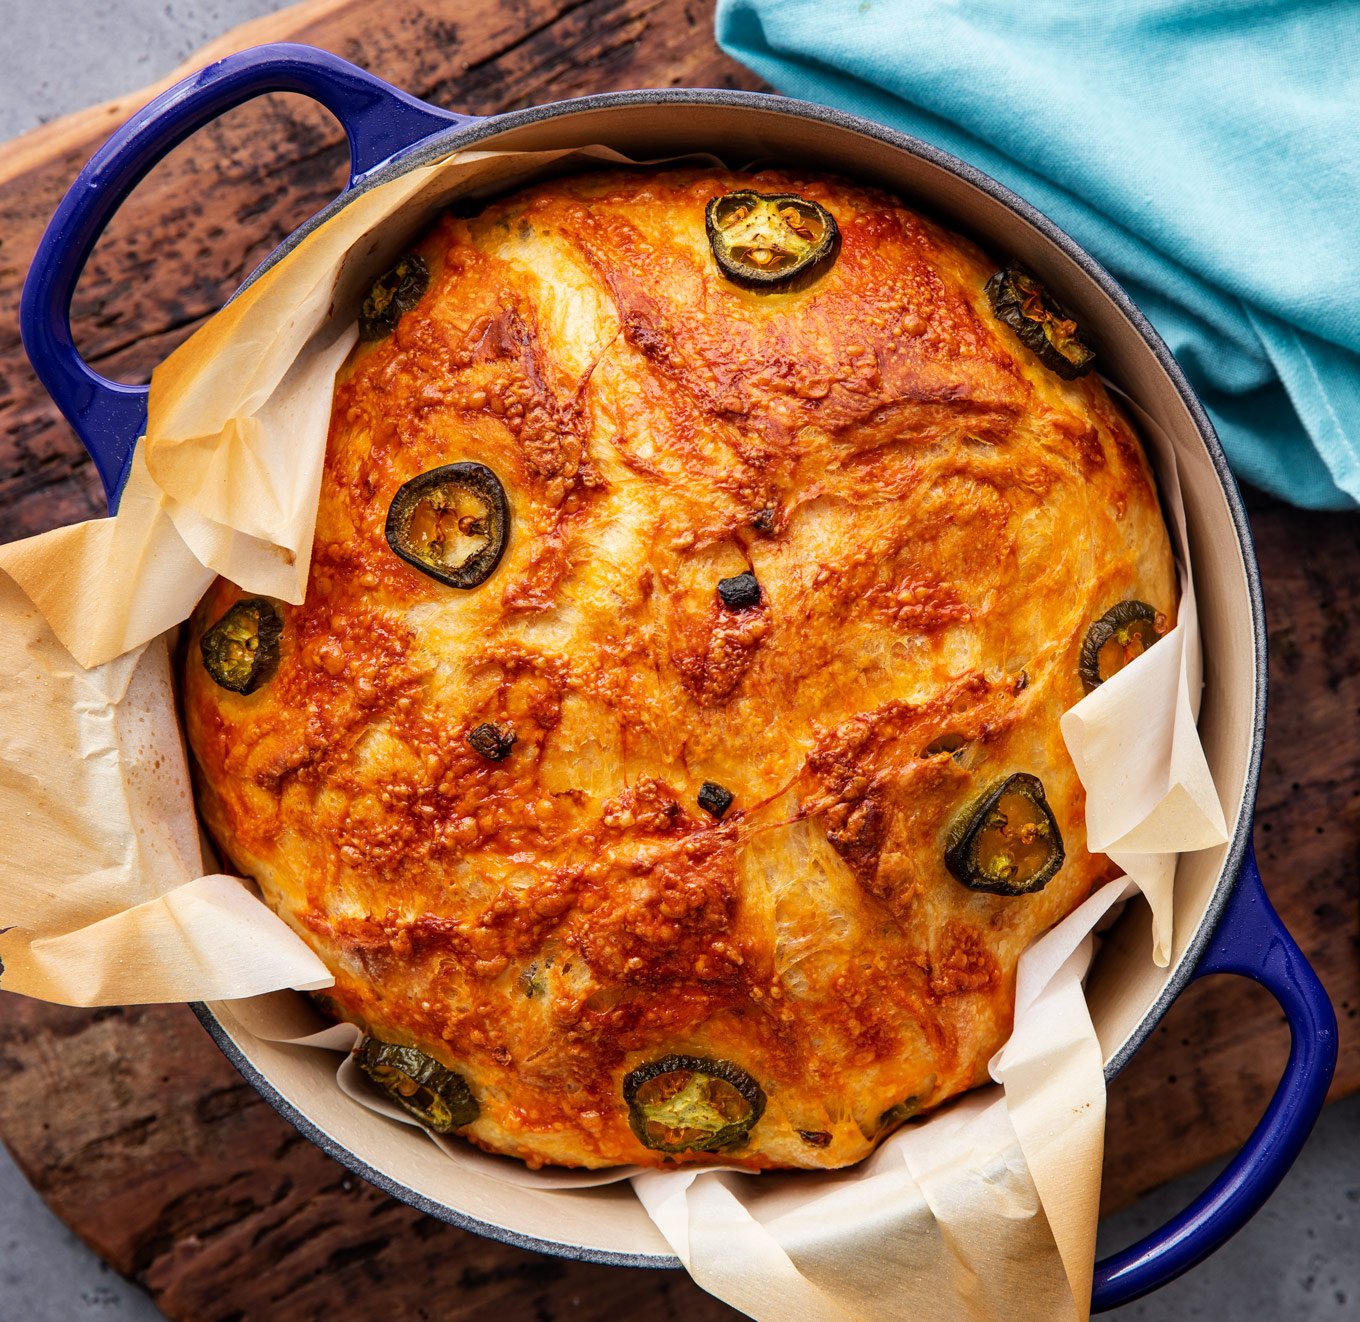 Jalapeno Cheddar Dutch Oven Bread (no knead!) - The Chunky Chef